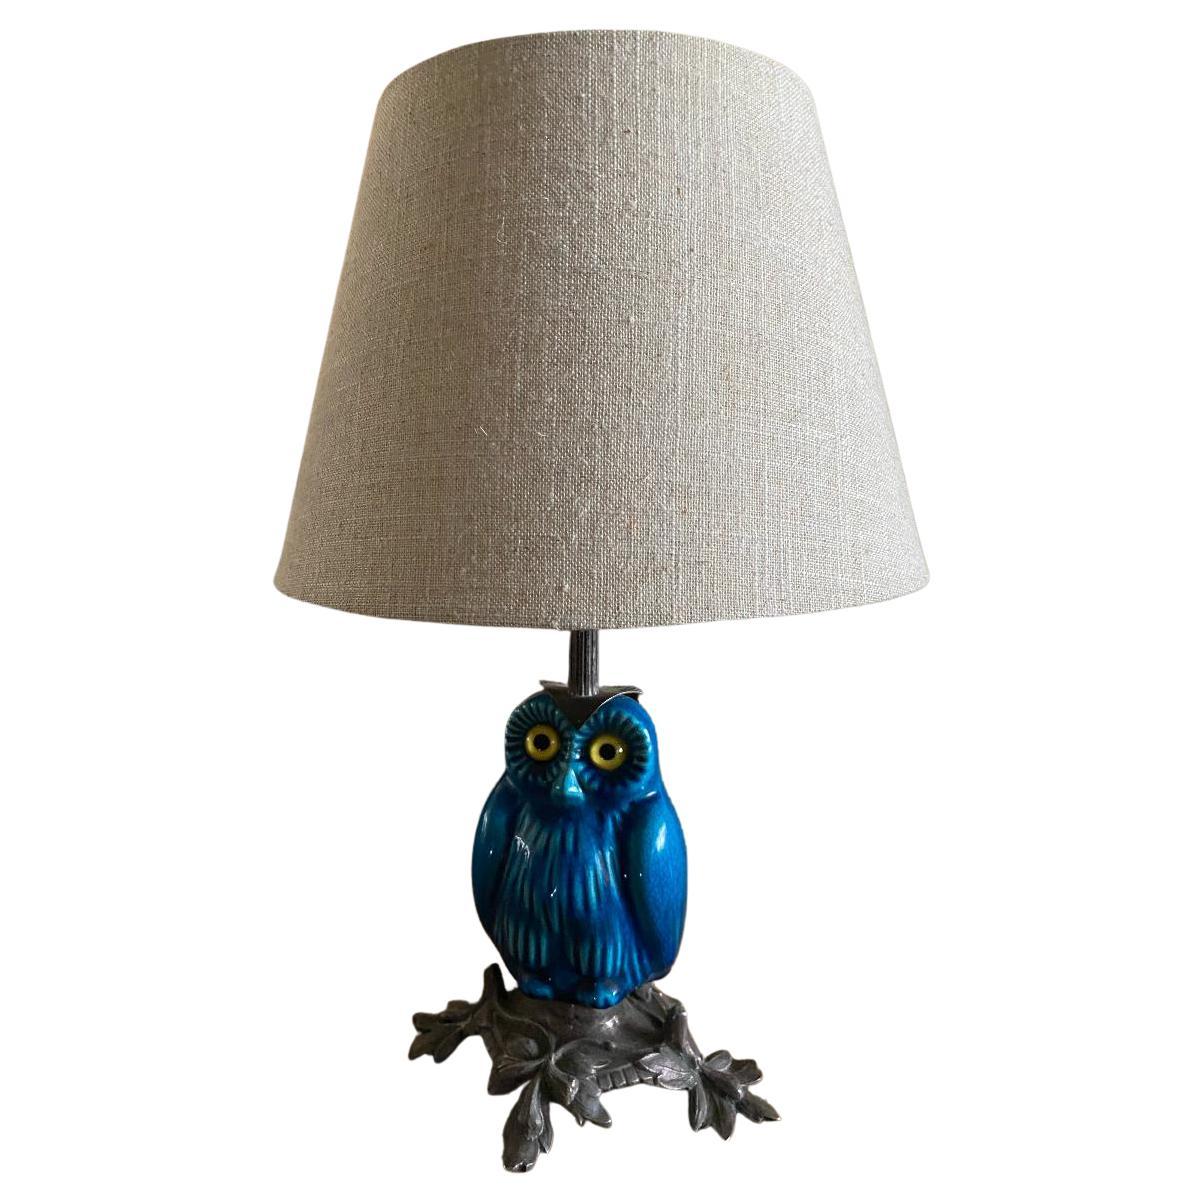 Art Nouveau Table Lamp with a Base of an Indigo Colored Owl For Sale